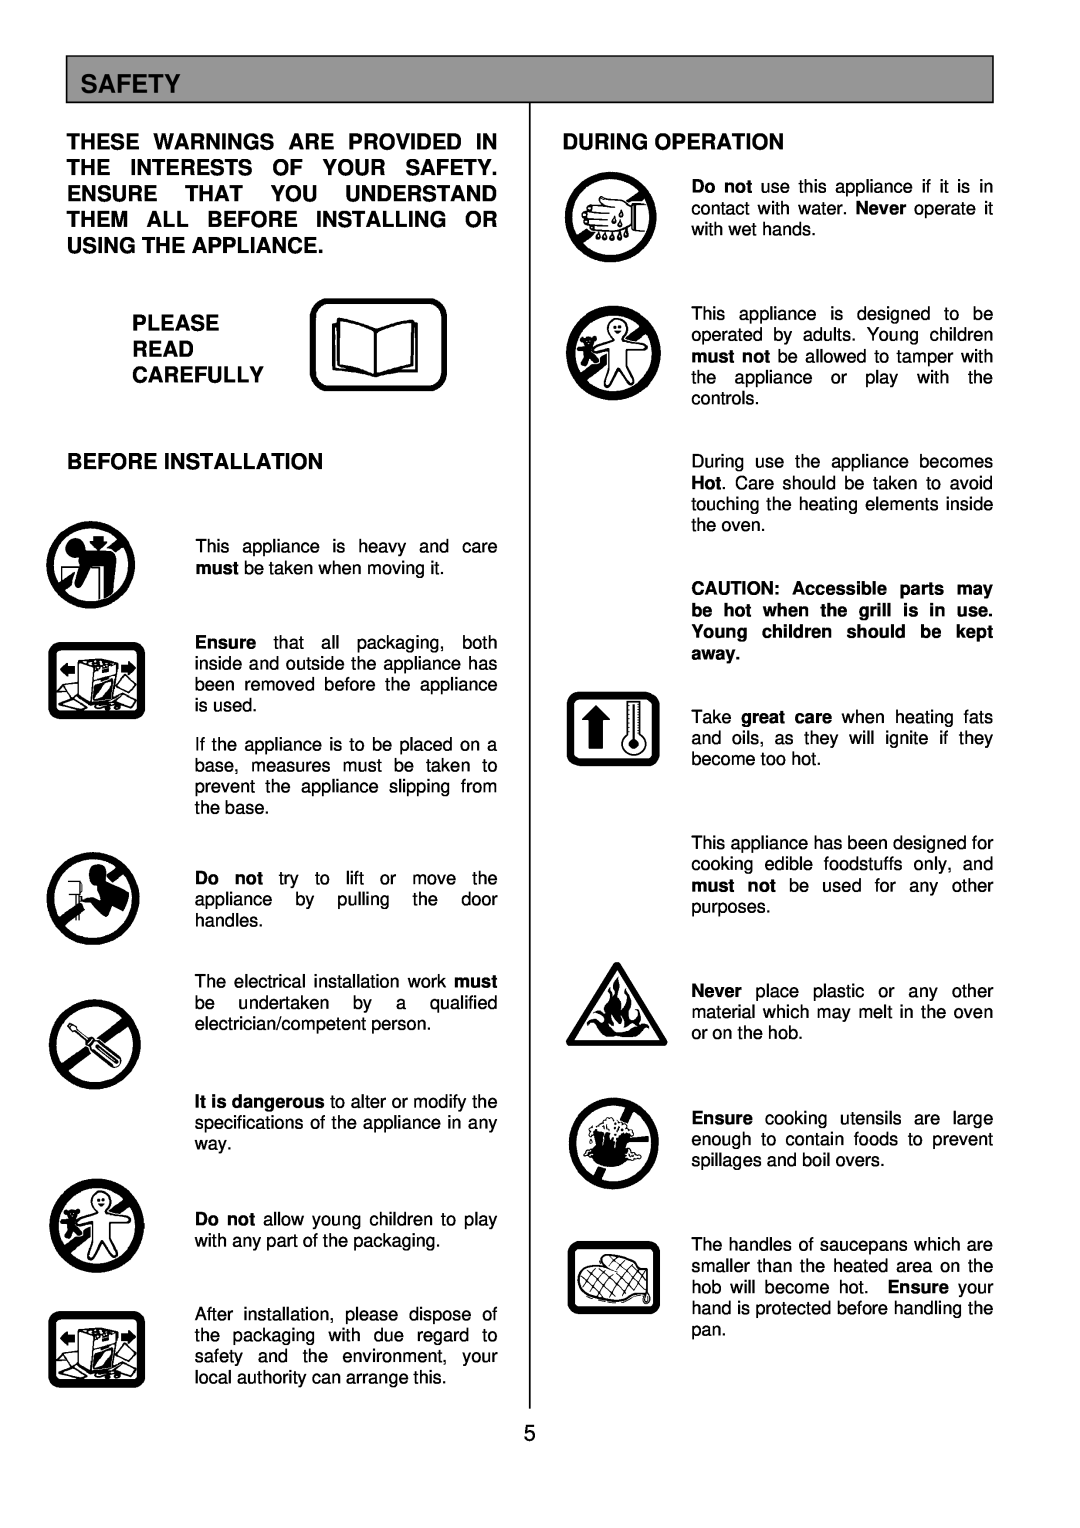 Tricity Bendix SB200 installation instructions Safety, Please Read Carefully Before Installation, During Operation 